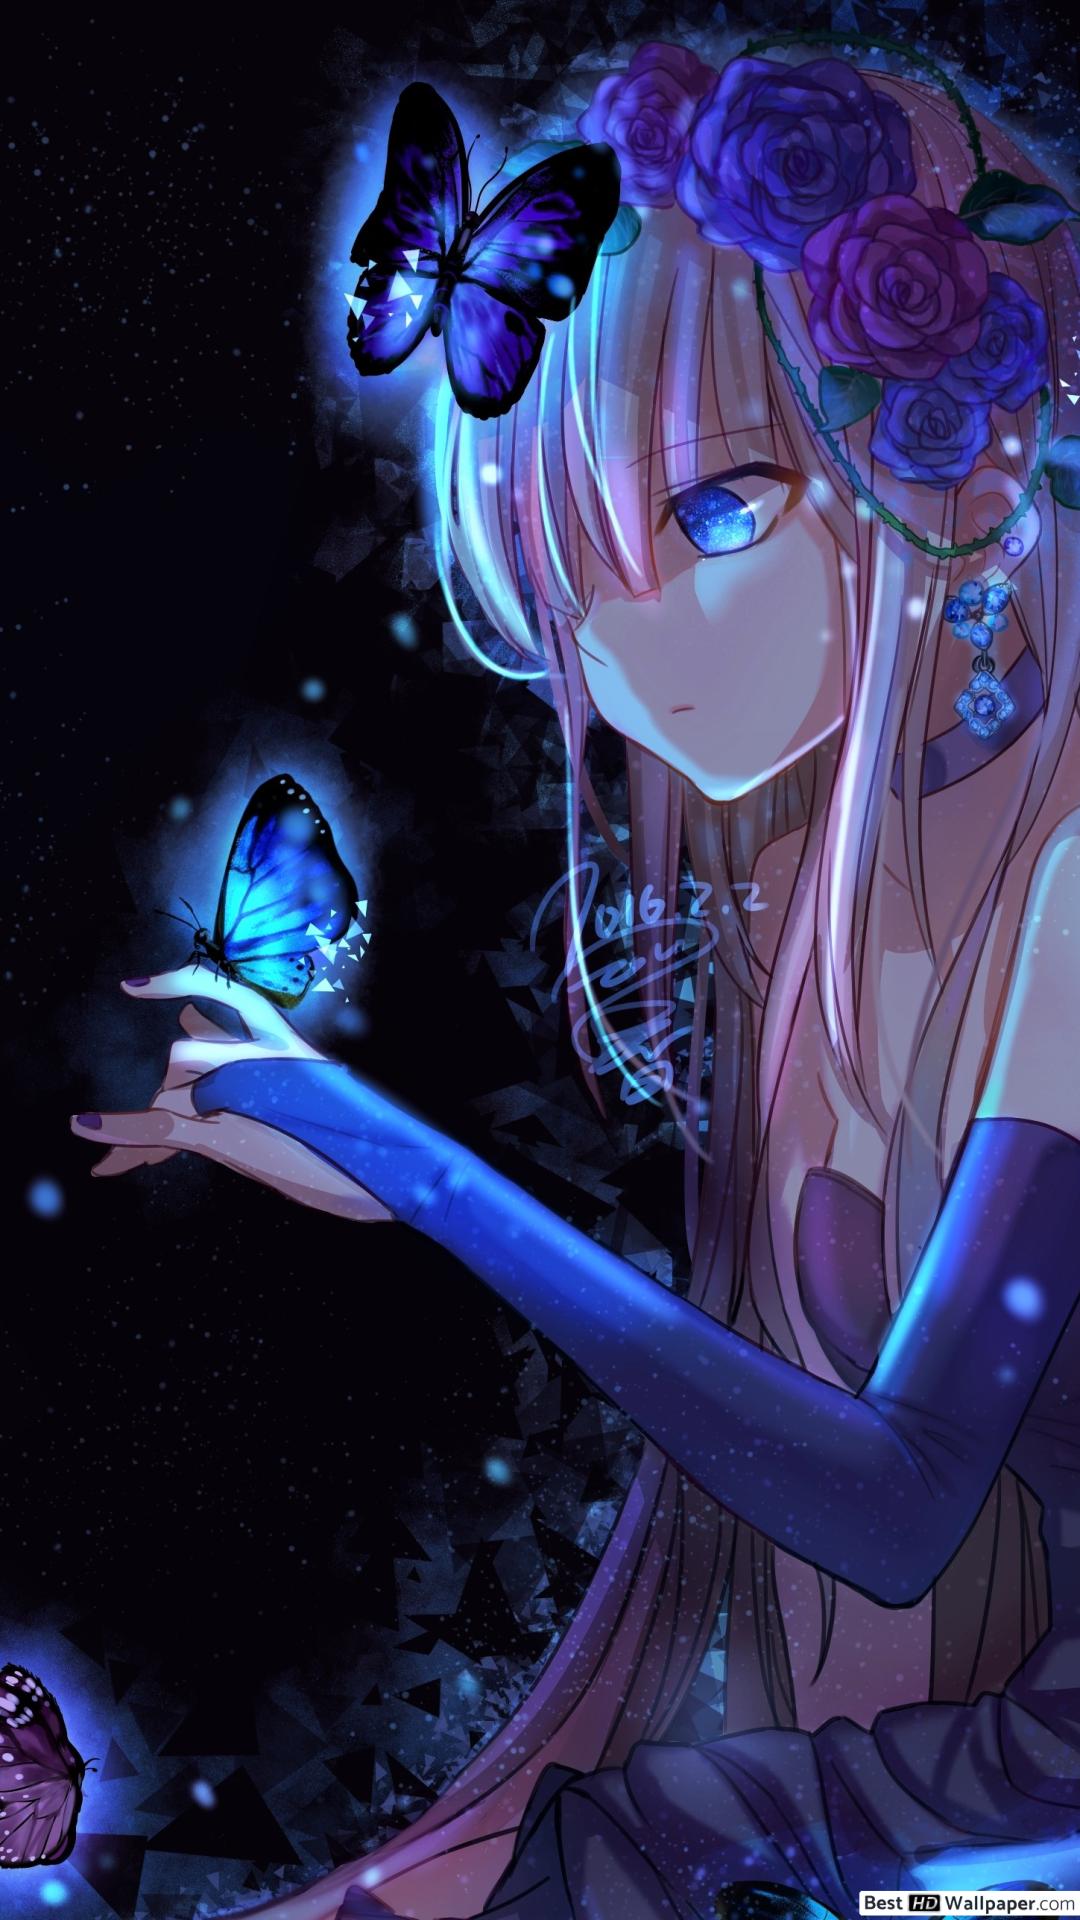 Anime Girl and Butterflies HD wallpaper download